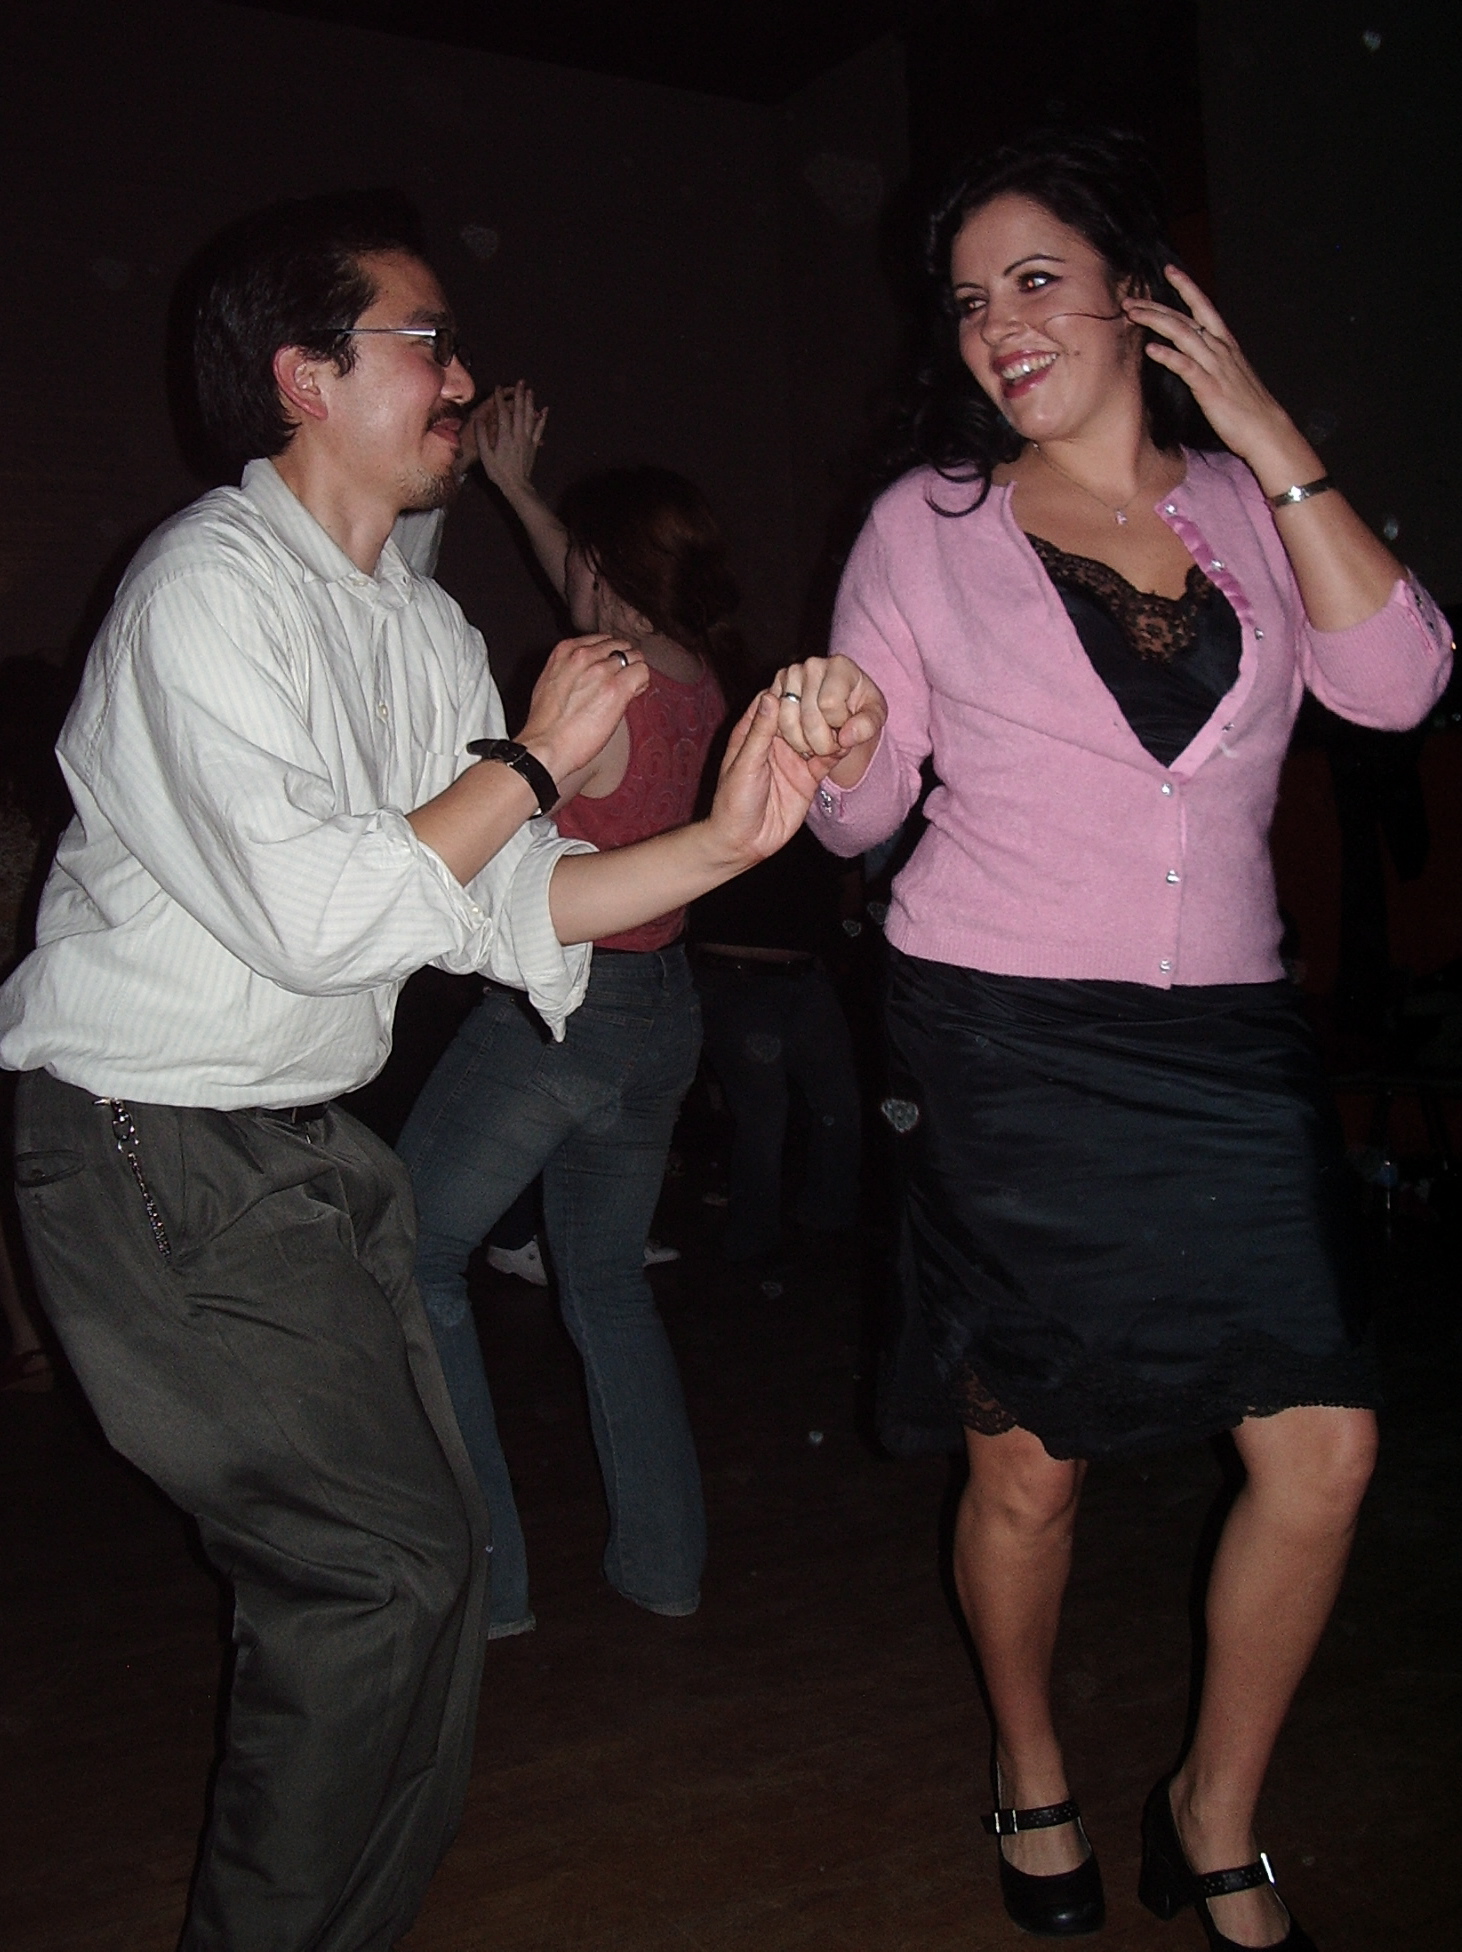 a man and woman dancing on a dance floor